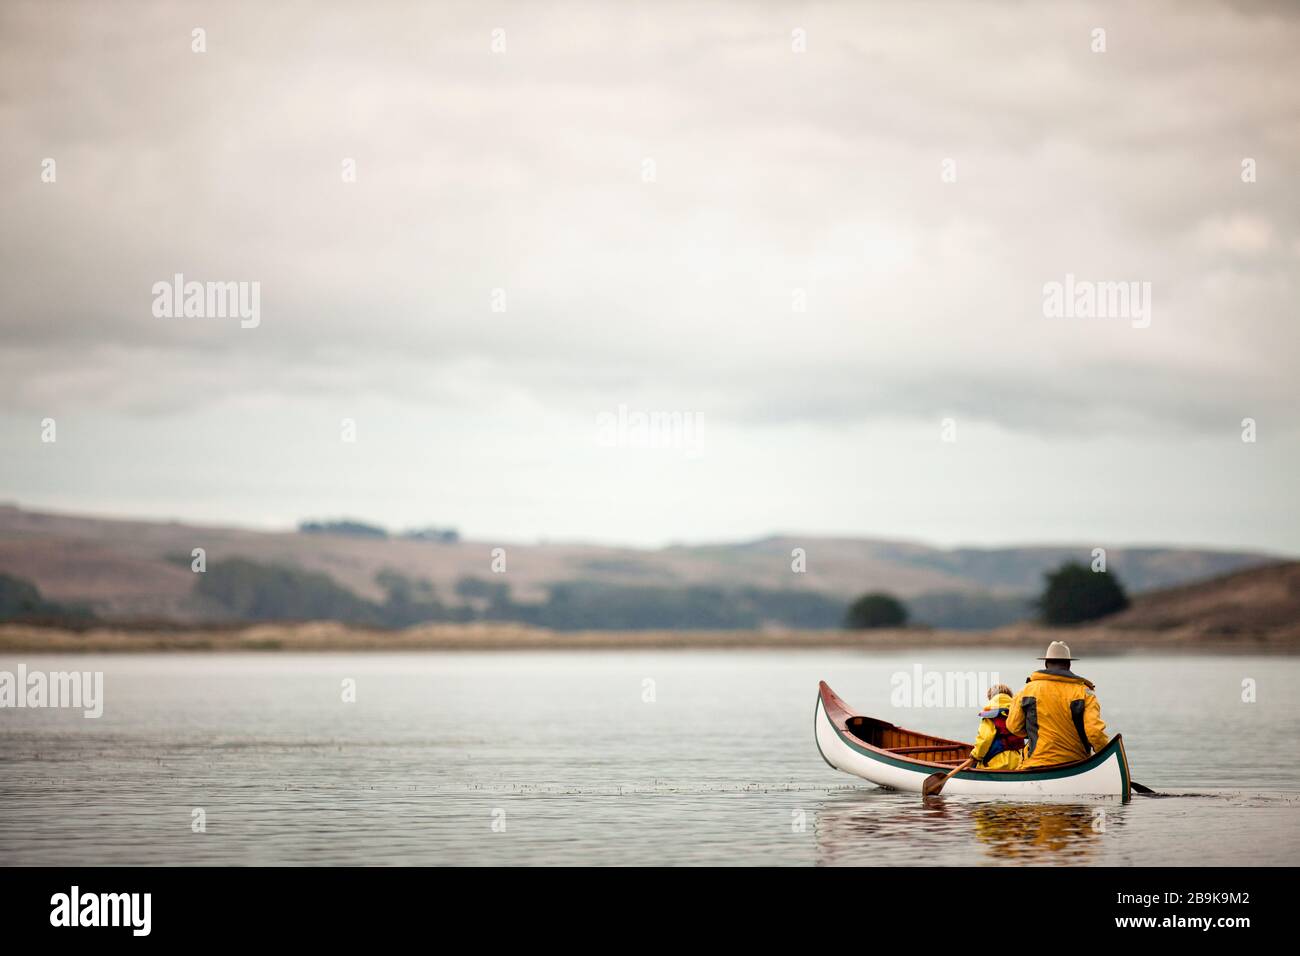 Man canoeing with his preschool age son. Stock Photo